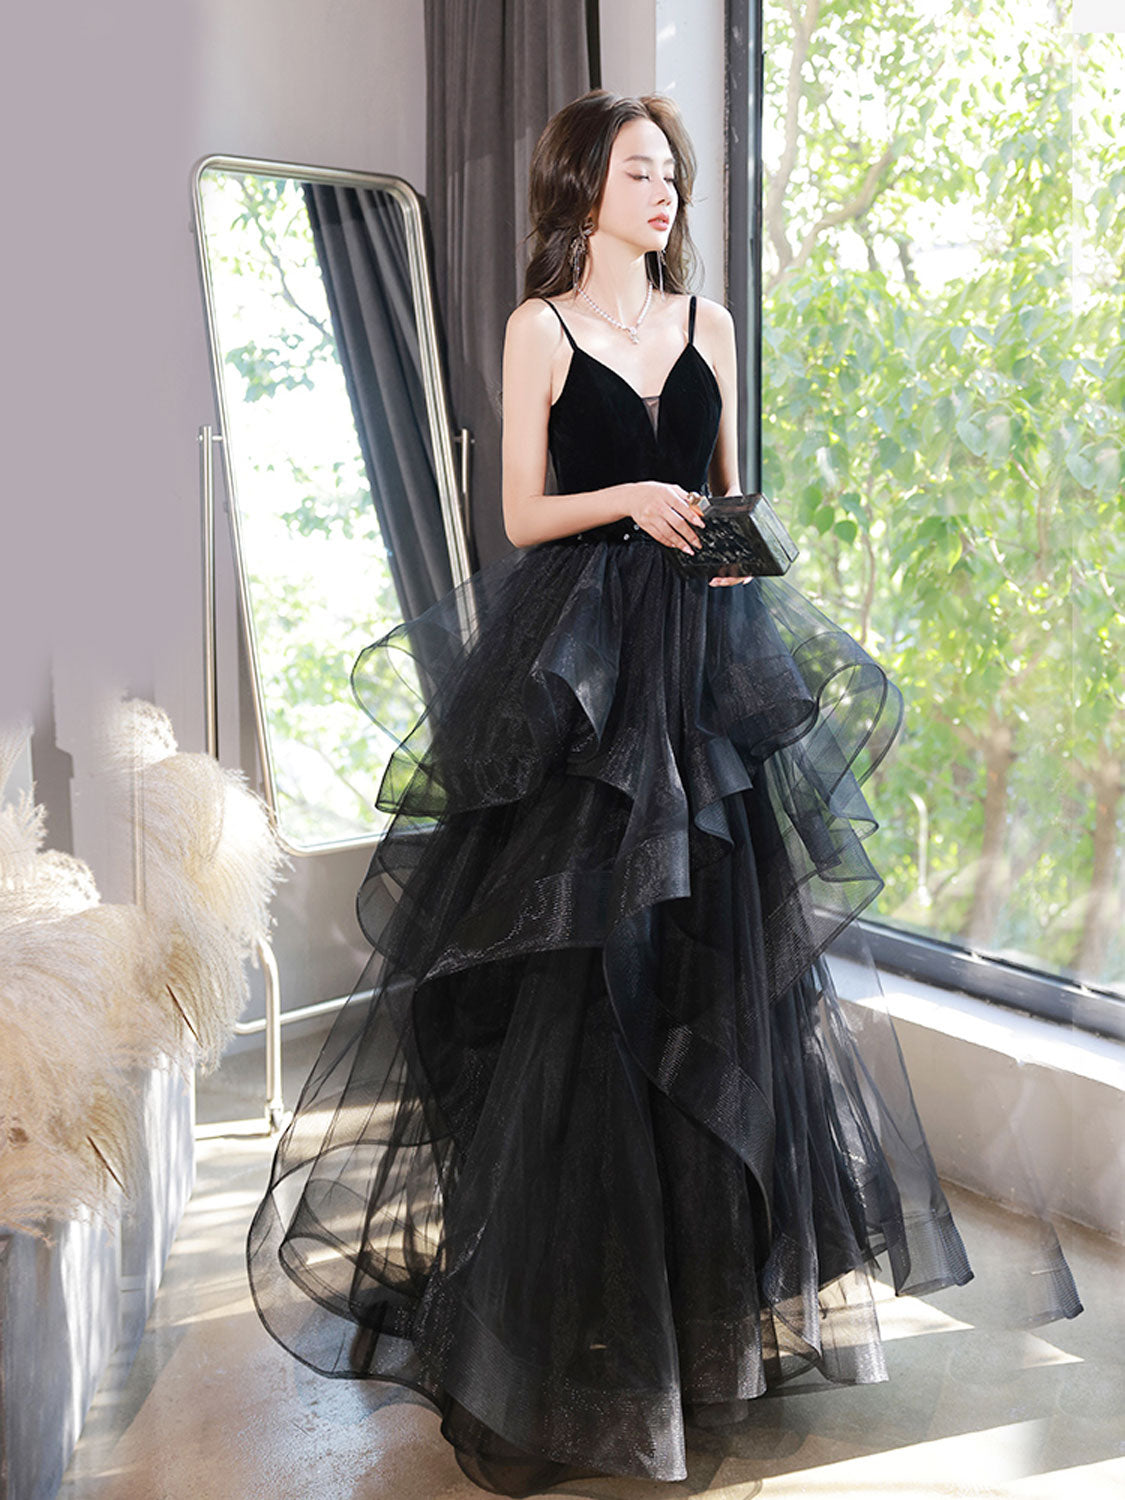 Hot Vintage Ball Gown Gothic Black Wedding Dresses Off Shoulder Ruffles  Draped Tiered Skirt Luxury Custom Plus Size Bridal Gowns From Bestoffers,  $177.4 | DHgate.Com